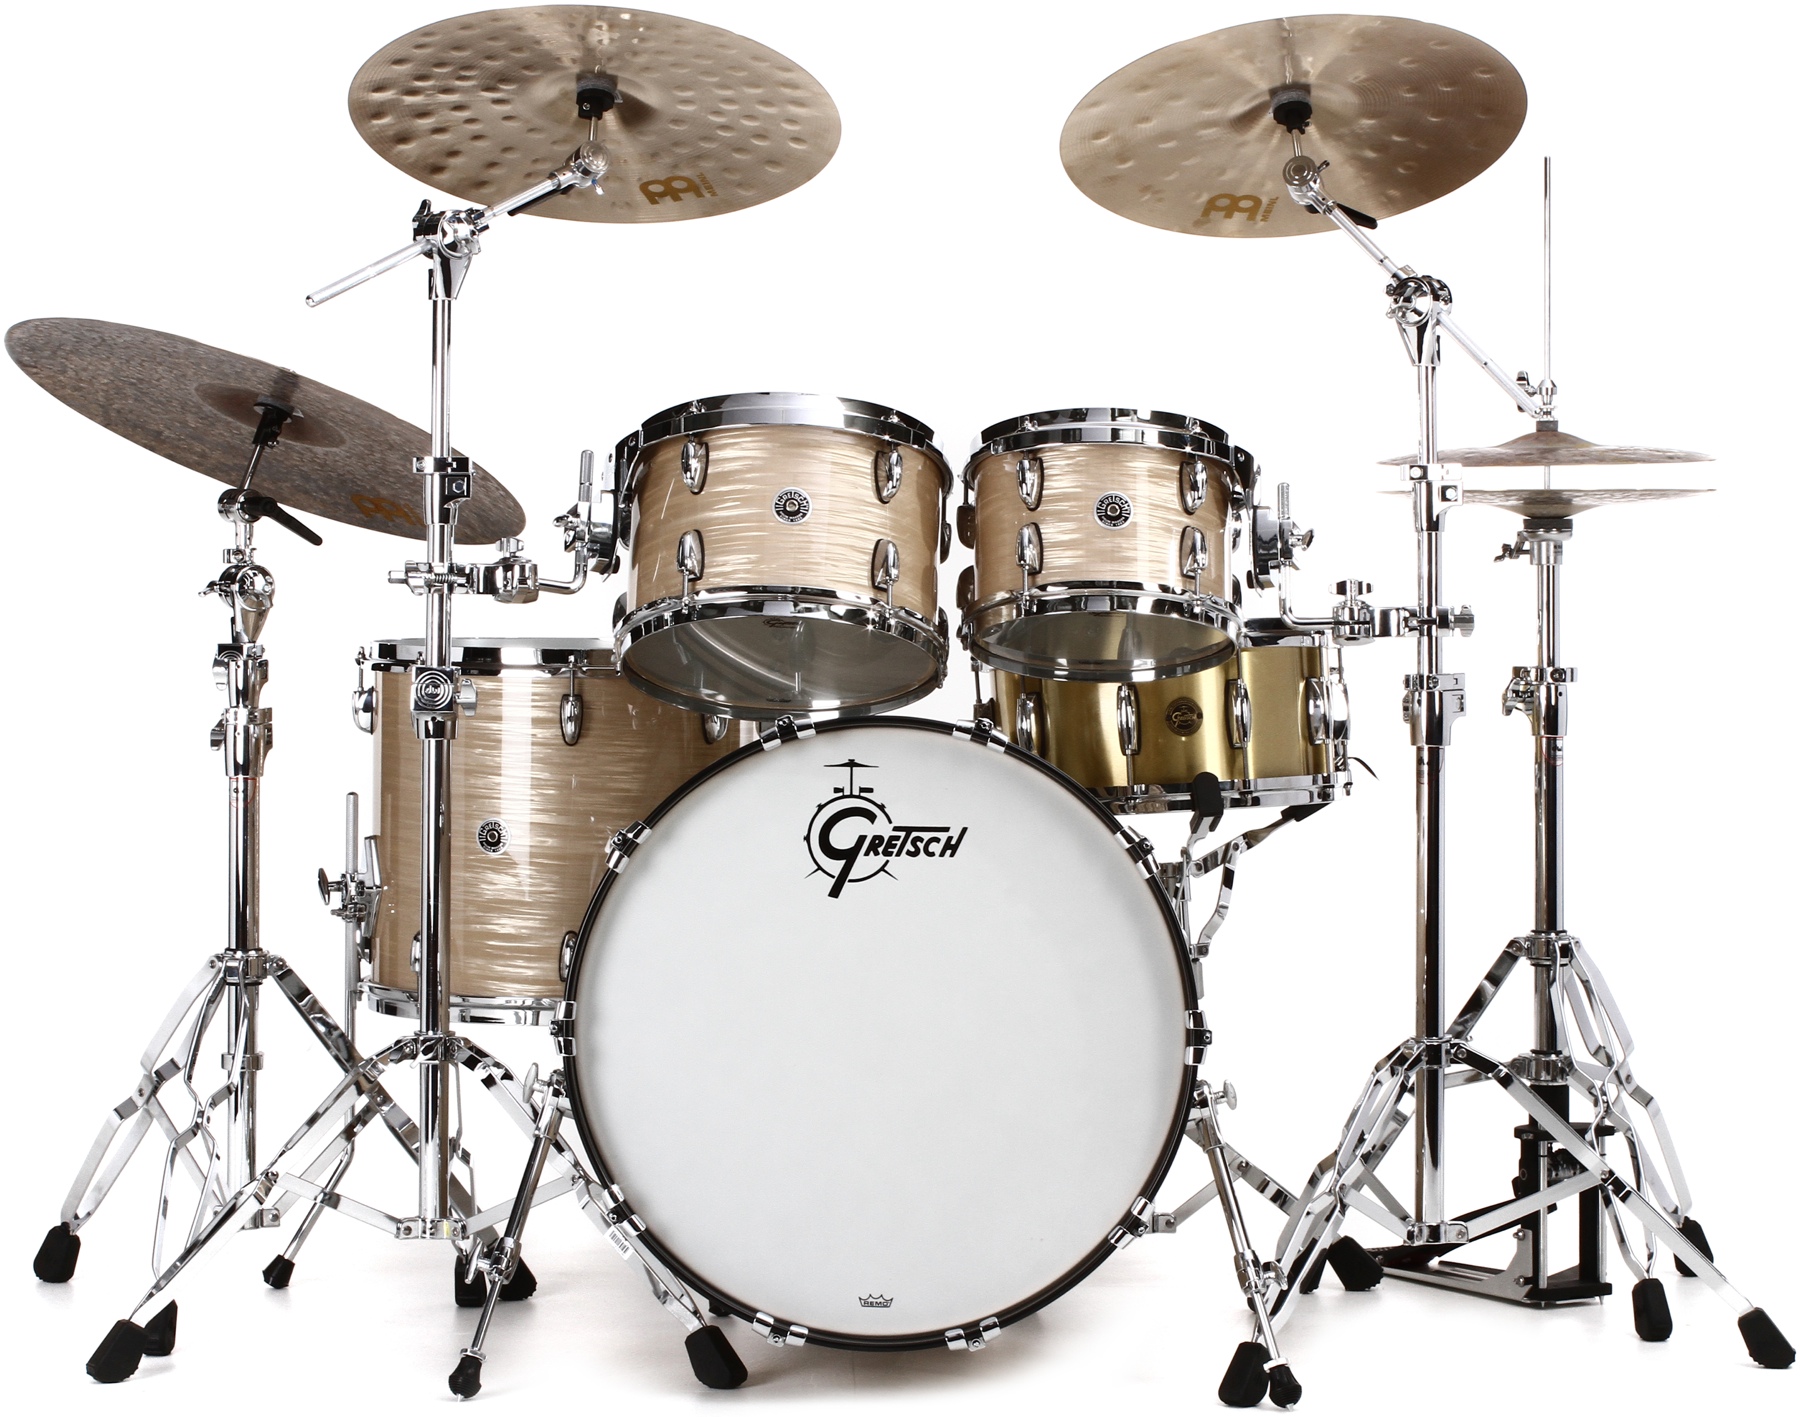 Gretsch Drums Brooklyn GB-E8246 4-Piece Shell Pack - Crème Oyster